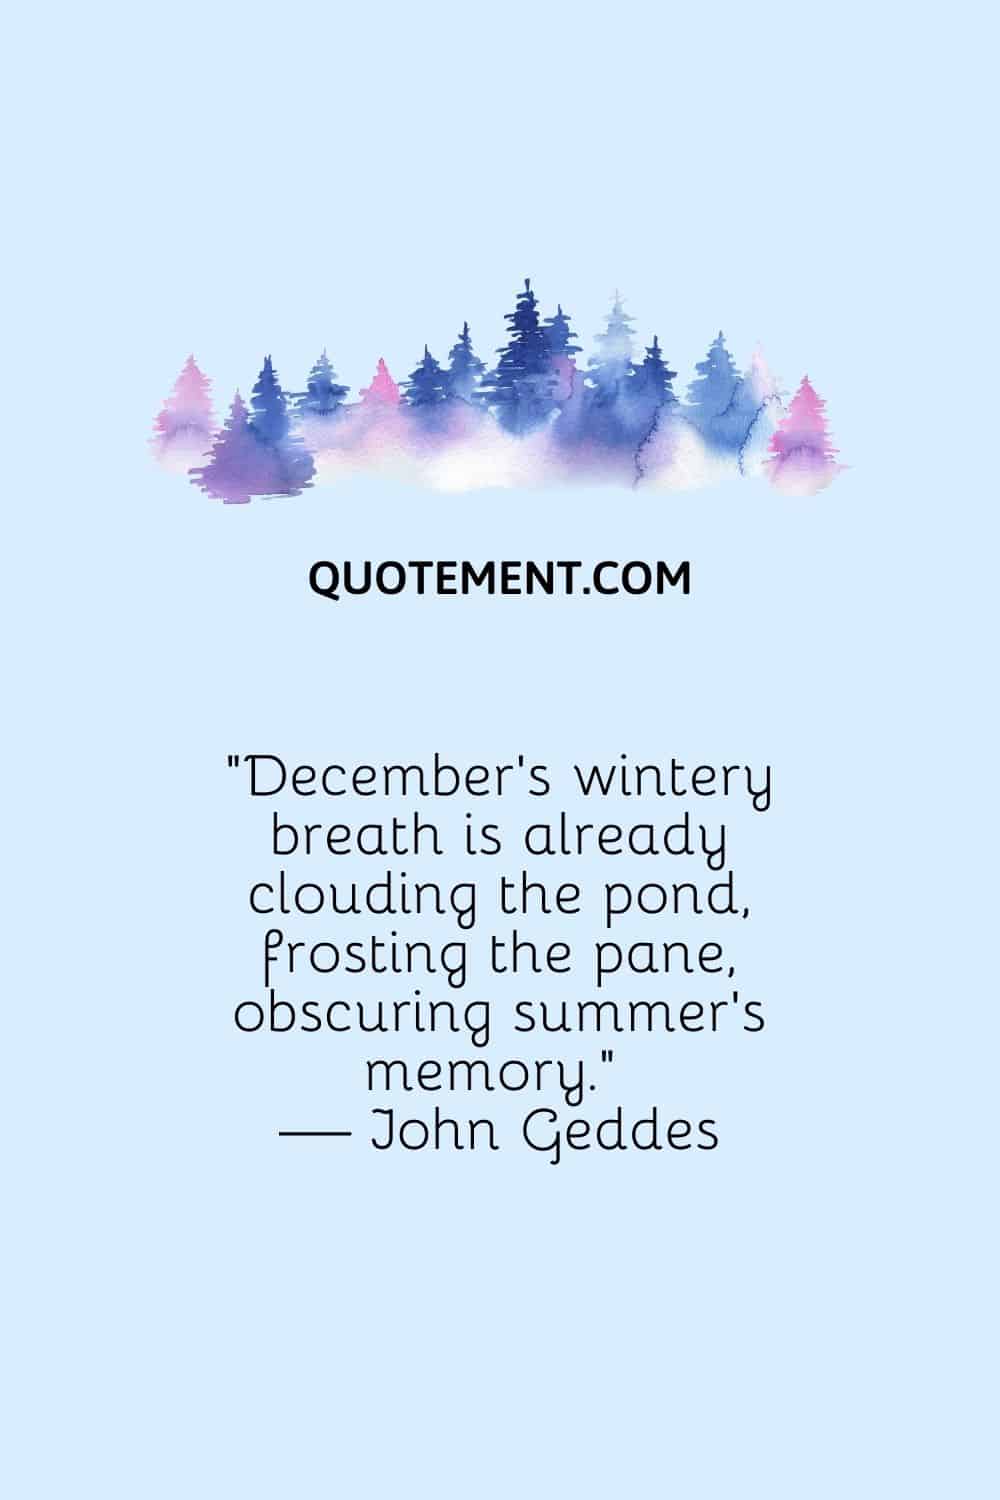 “December’s wintery breath is already clouding the pond, frosting the pane, obscuring summer’s memory.” — John Geddes